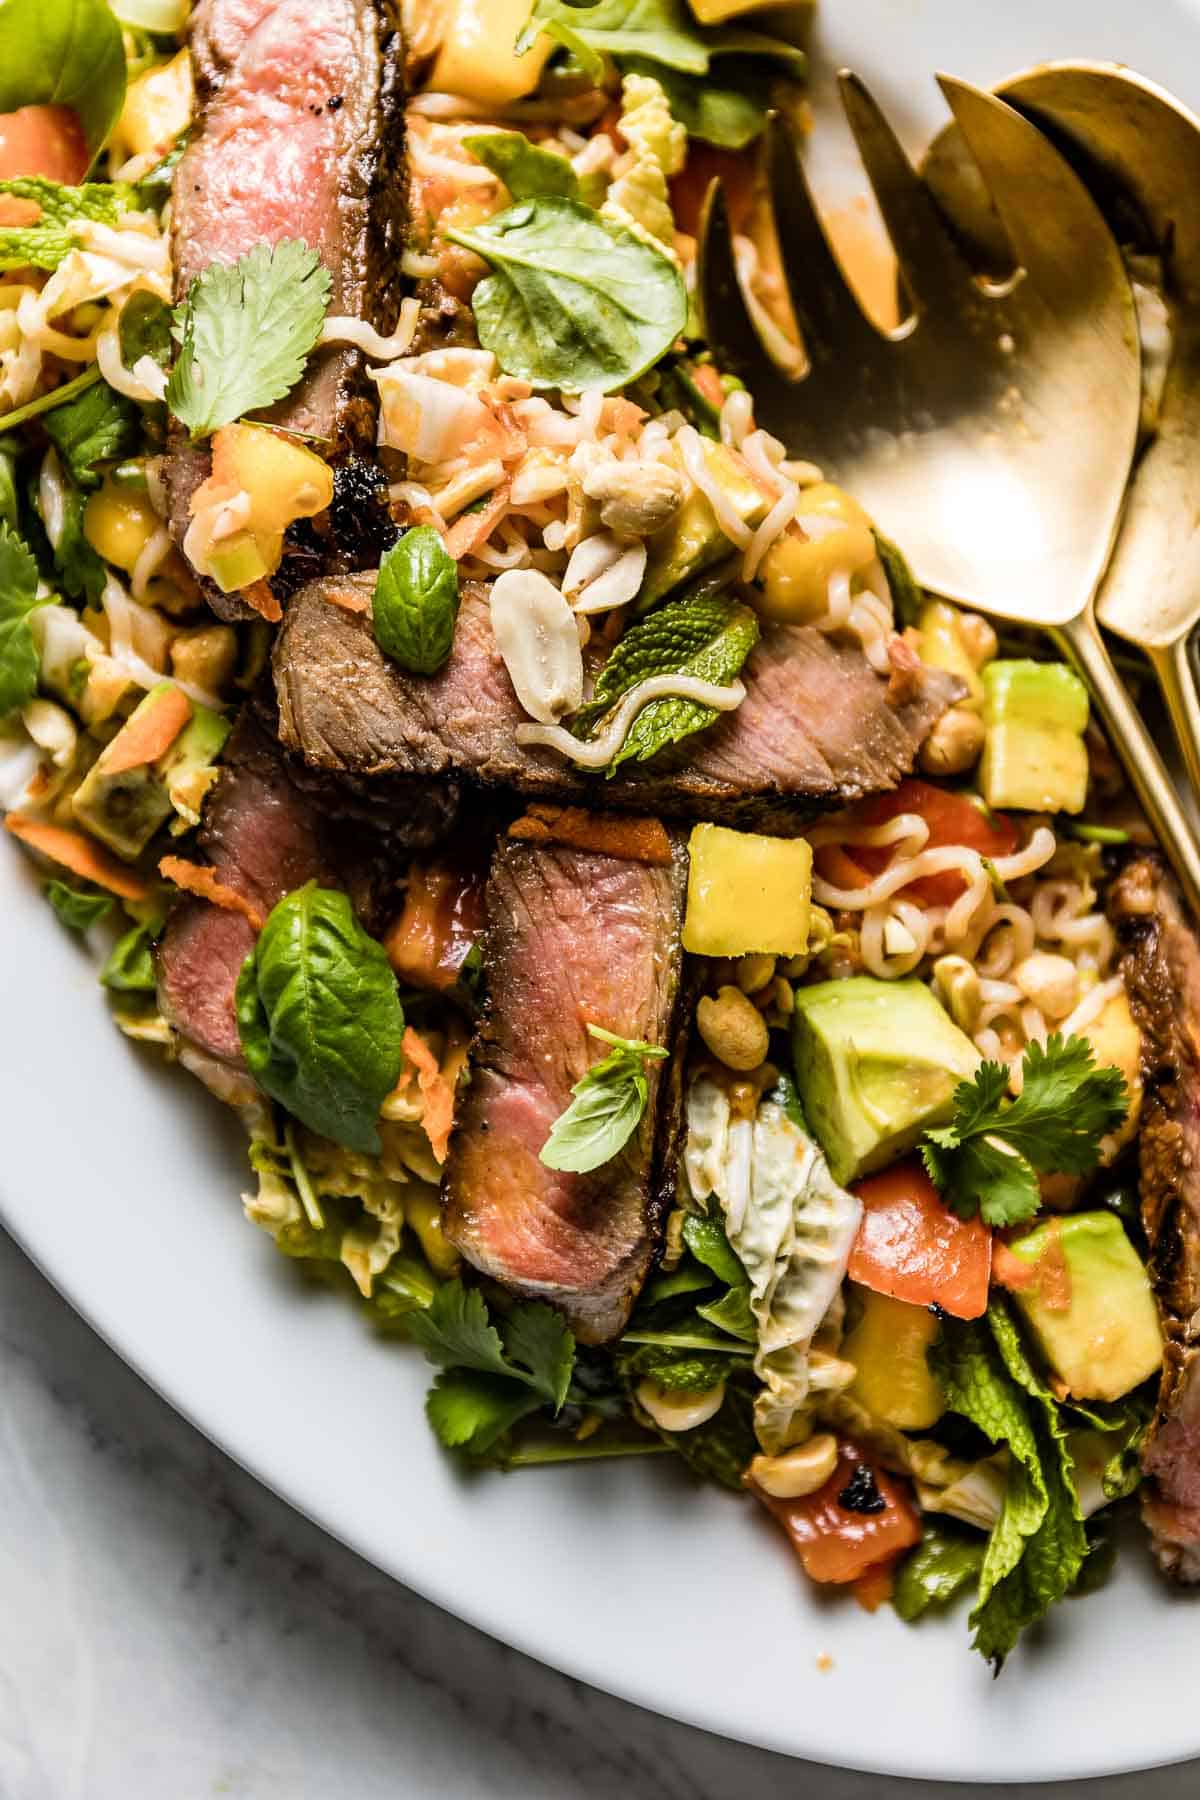 Thai beef salad with noodles on a plate from the top view